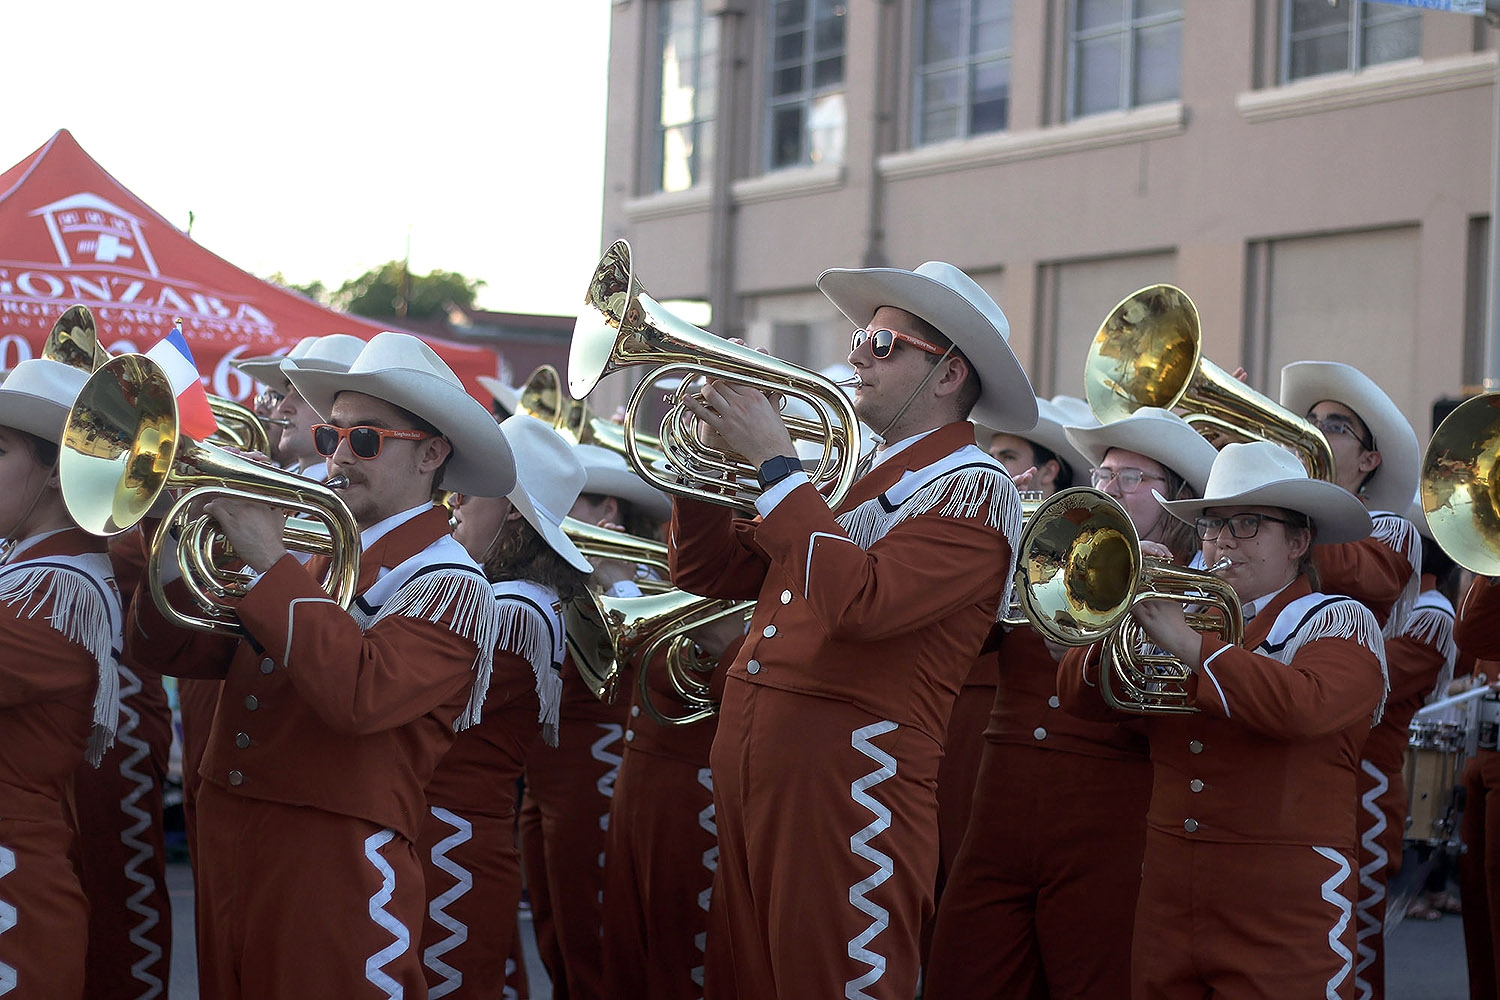 The University of Texas band rolls into the parade with a warm welcome from the crowd during Fiesta Flambeau Saturday night April, 27 2019. <em>Photo by Noah Alcala Bach | Heron contributor</em>